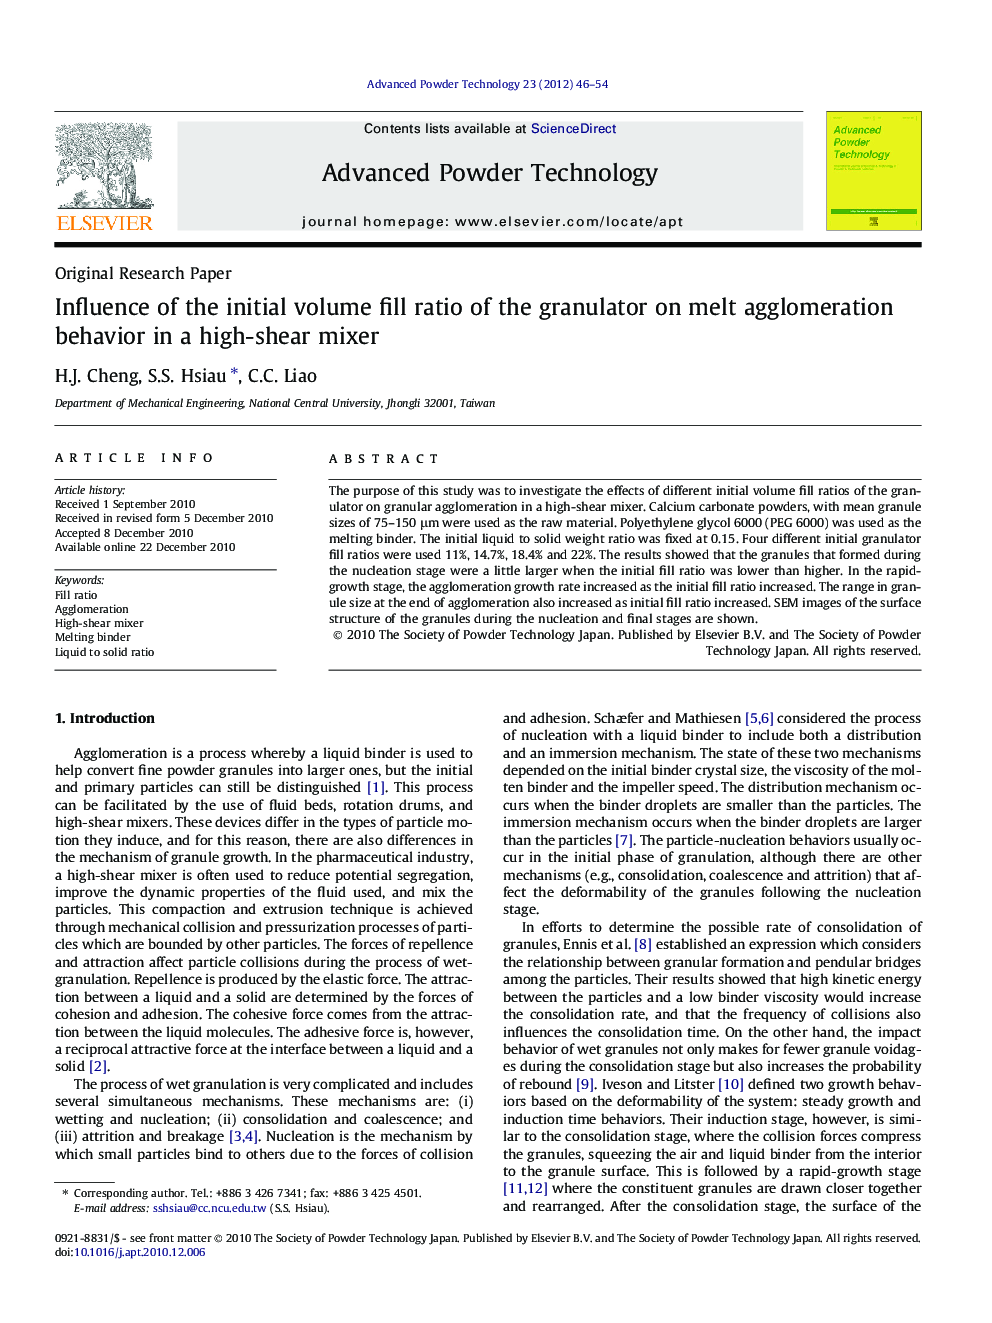 Influence of the initial volume fill ratio of the granulator on melt agglomeration behavior in a high-shear mixer